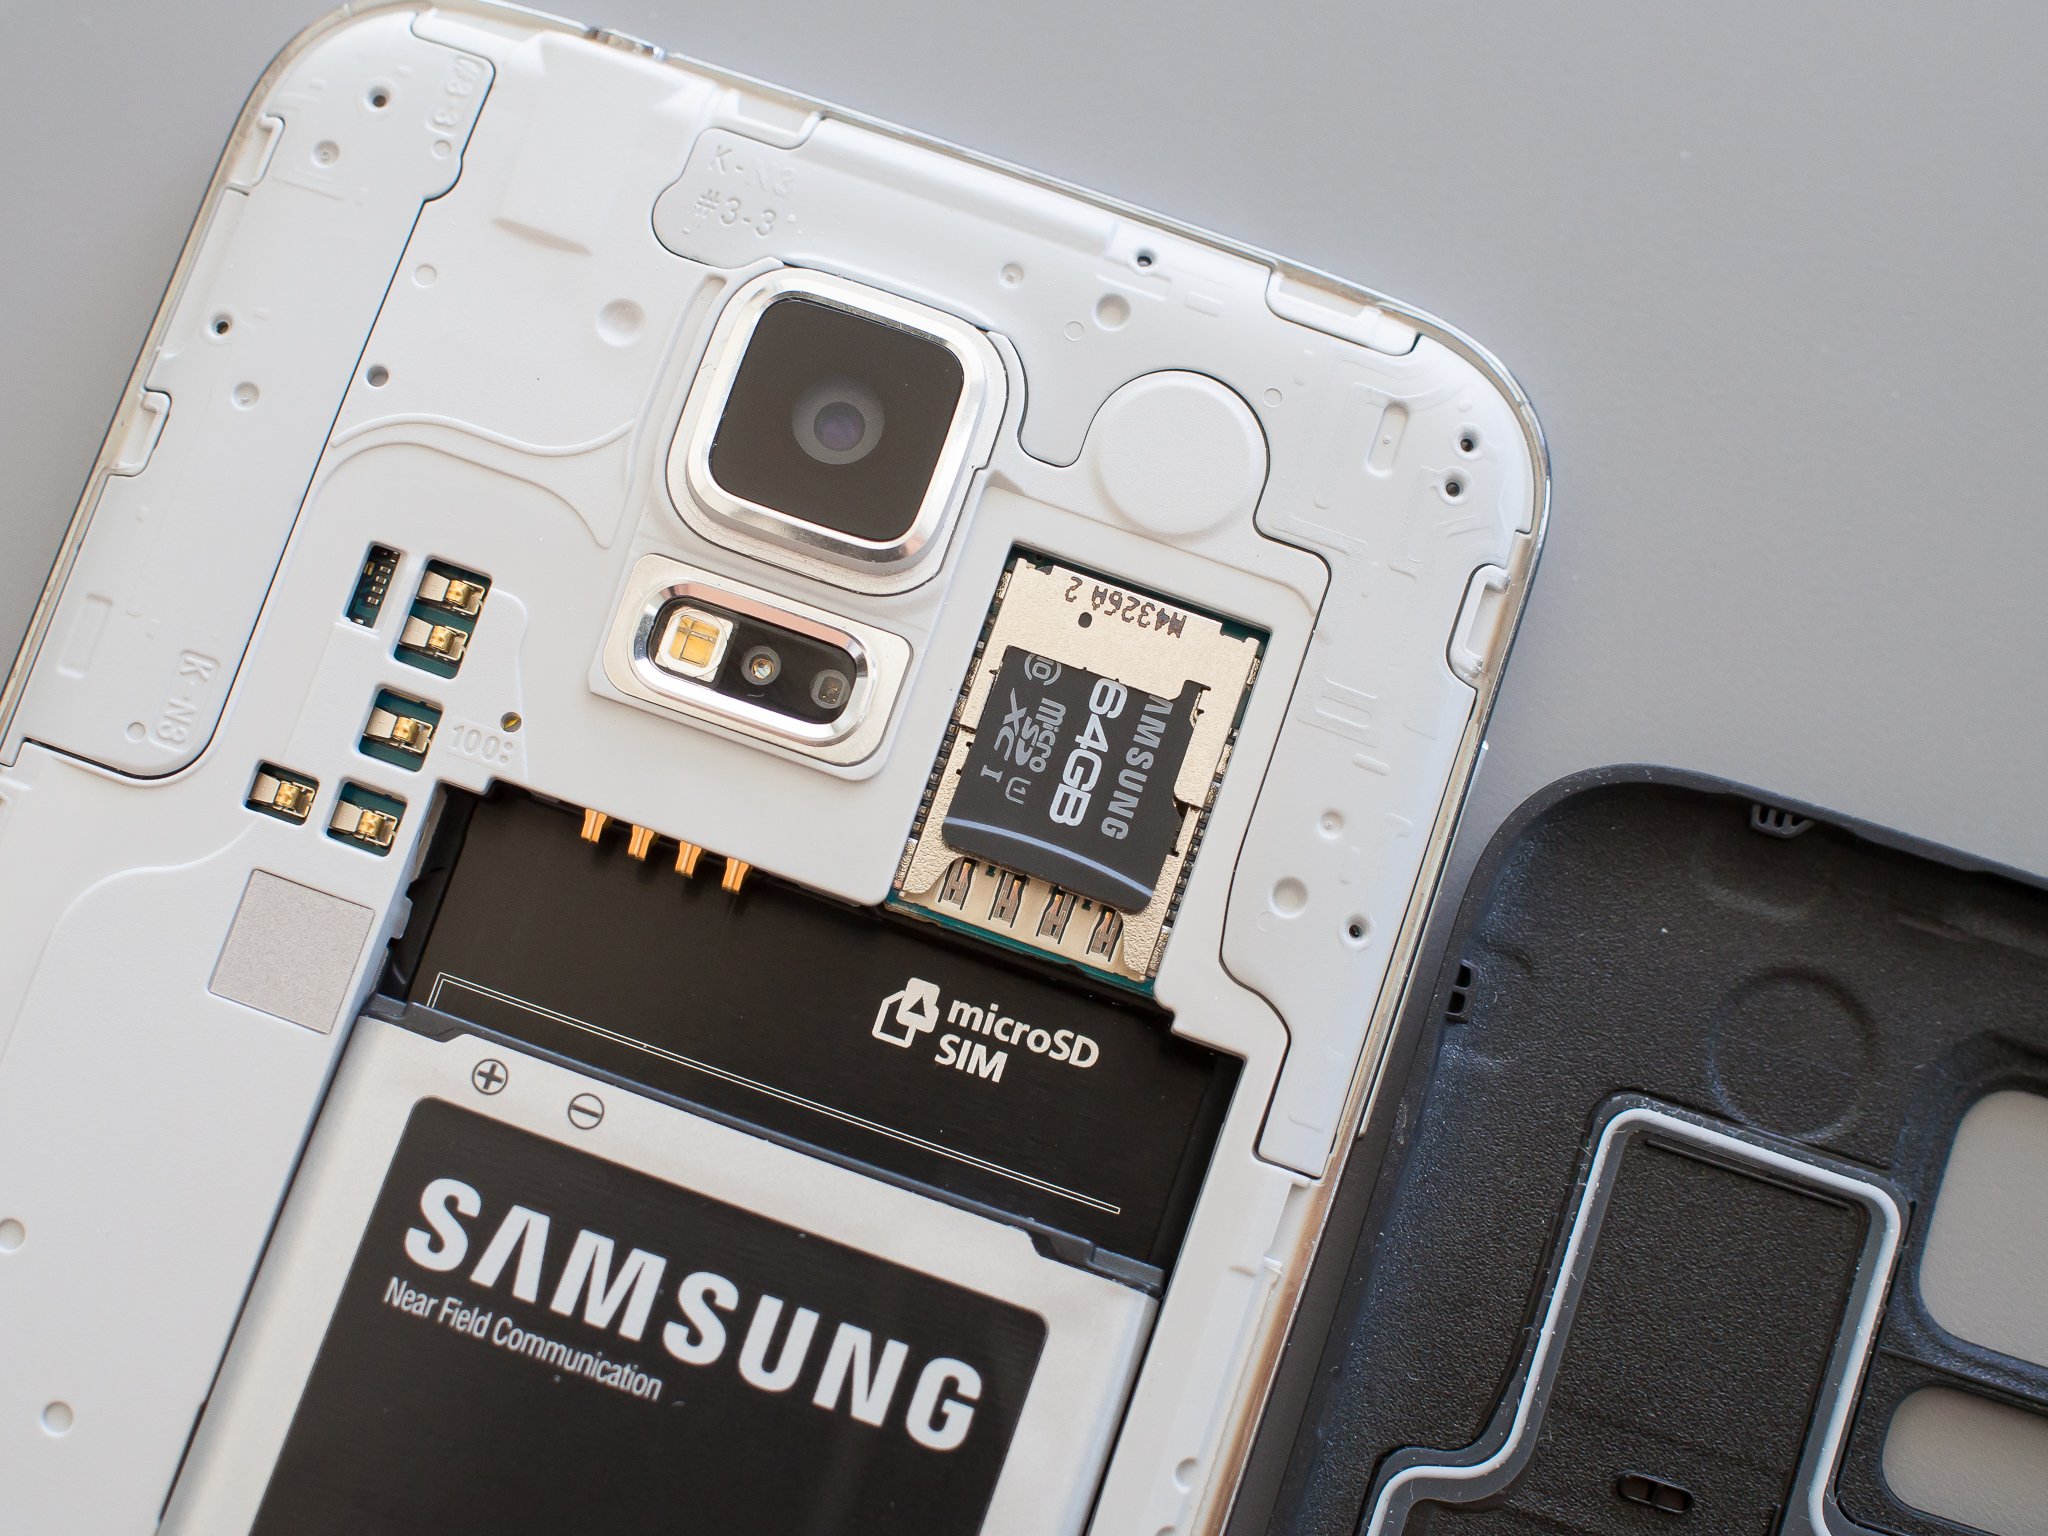 krone Et kors uklar How to insert and replace the SD card on the Galaxy S5 | Android Central